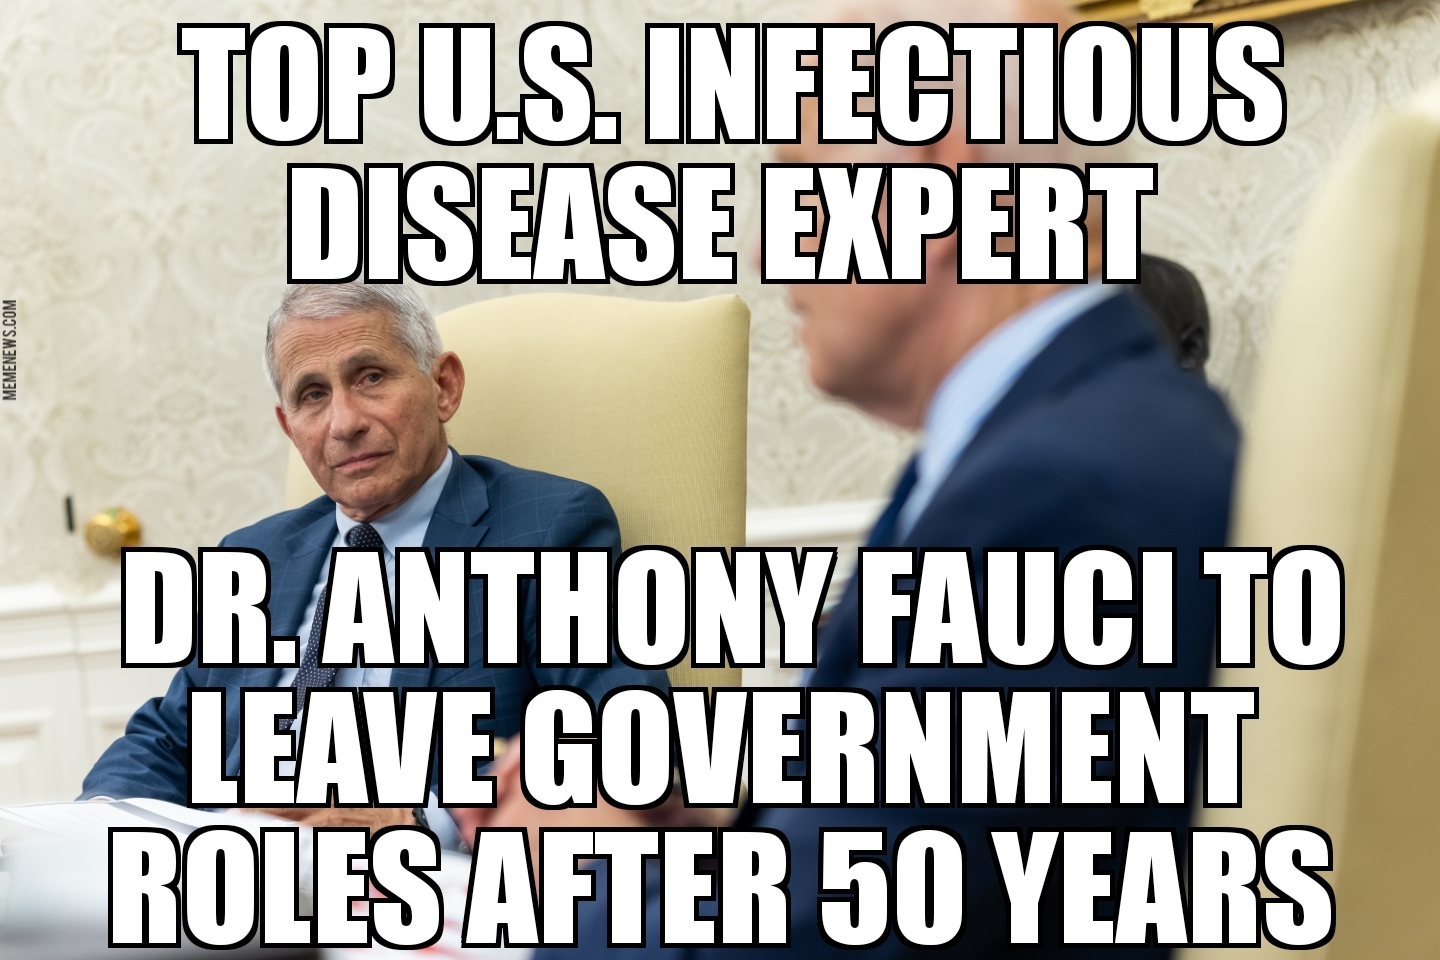 Anthony Fauci to leave government